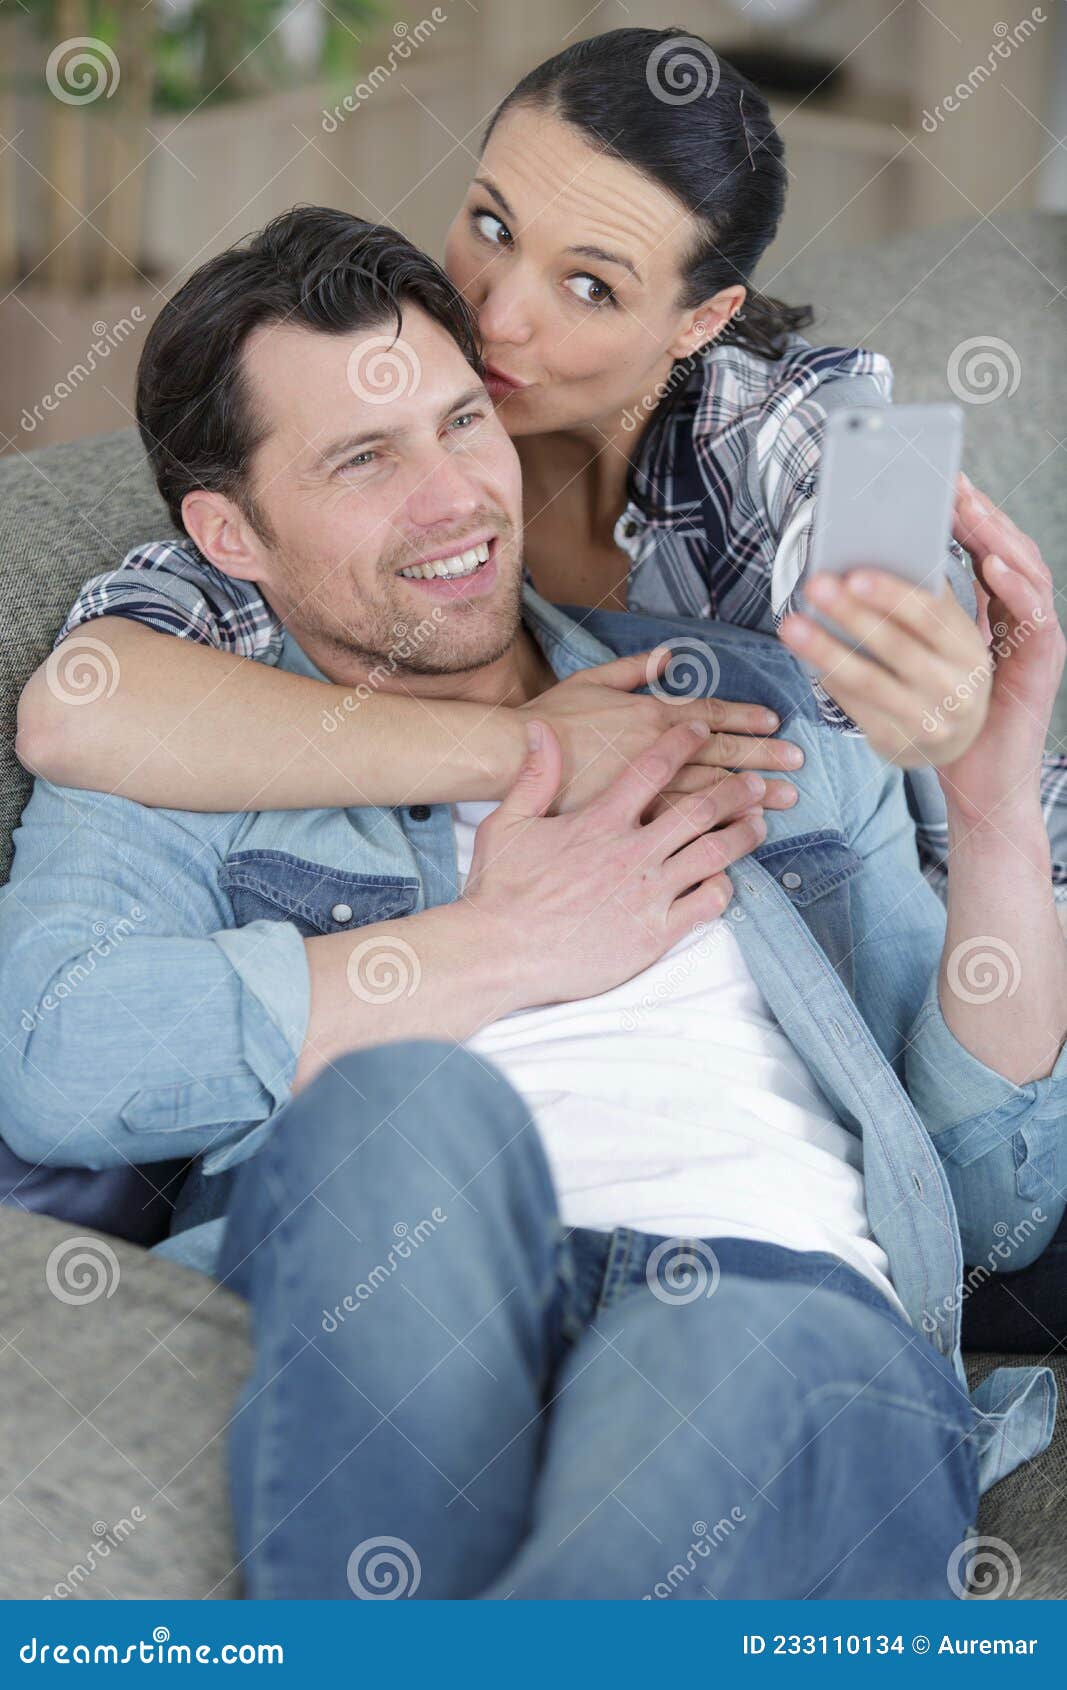 man and woman doing selfie at home